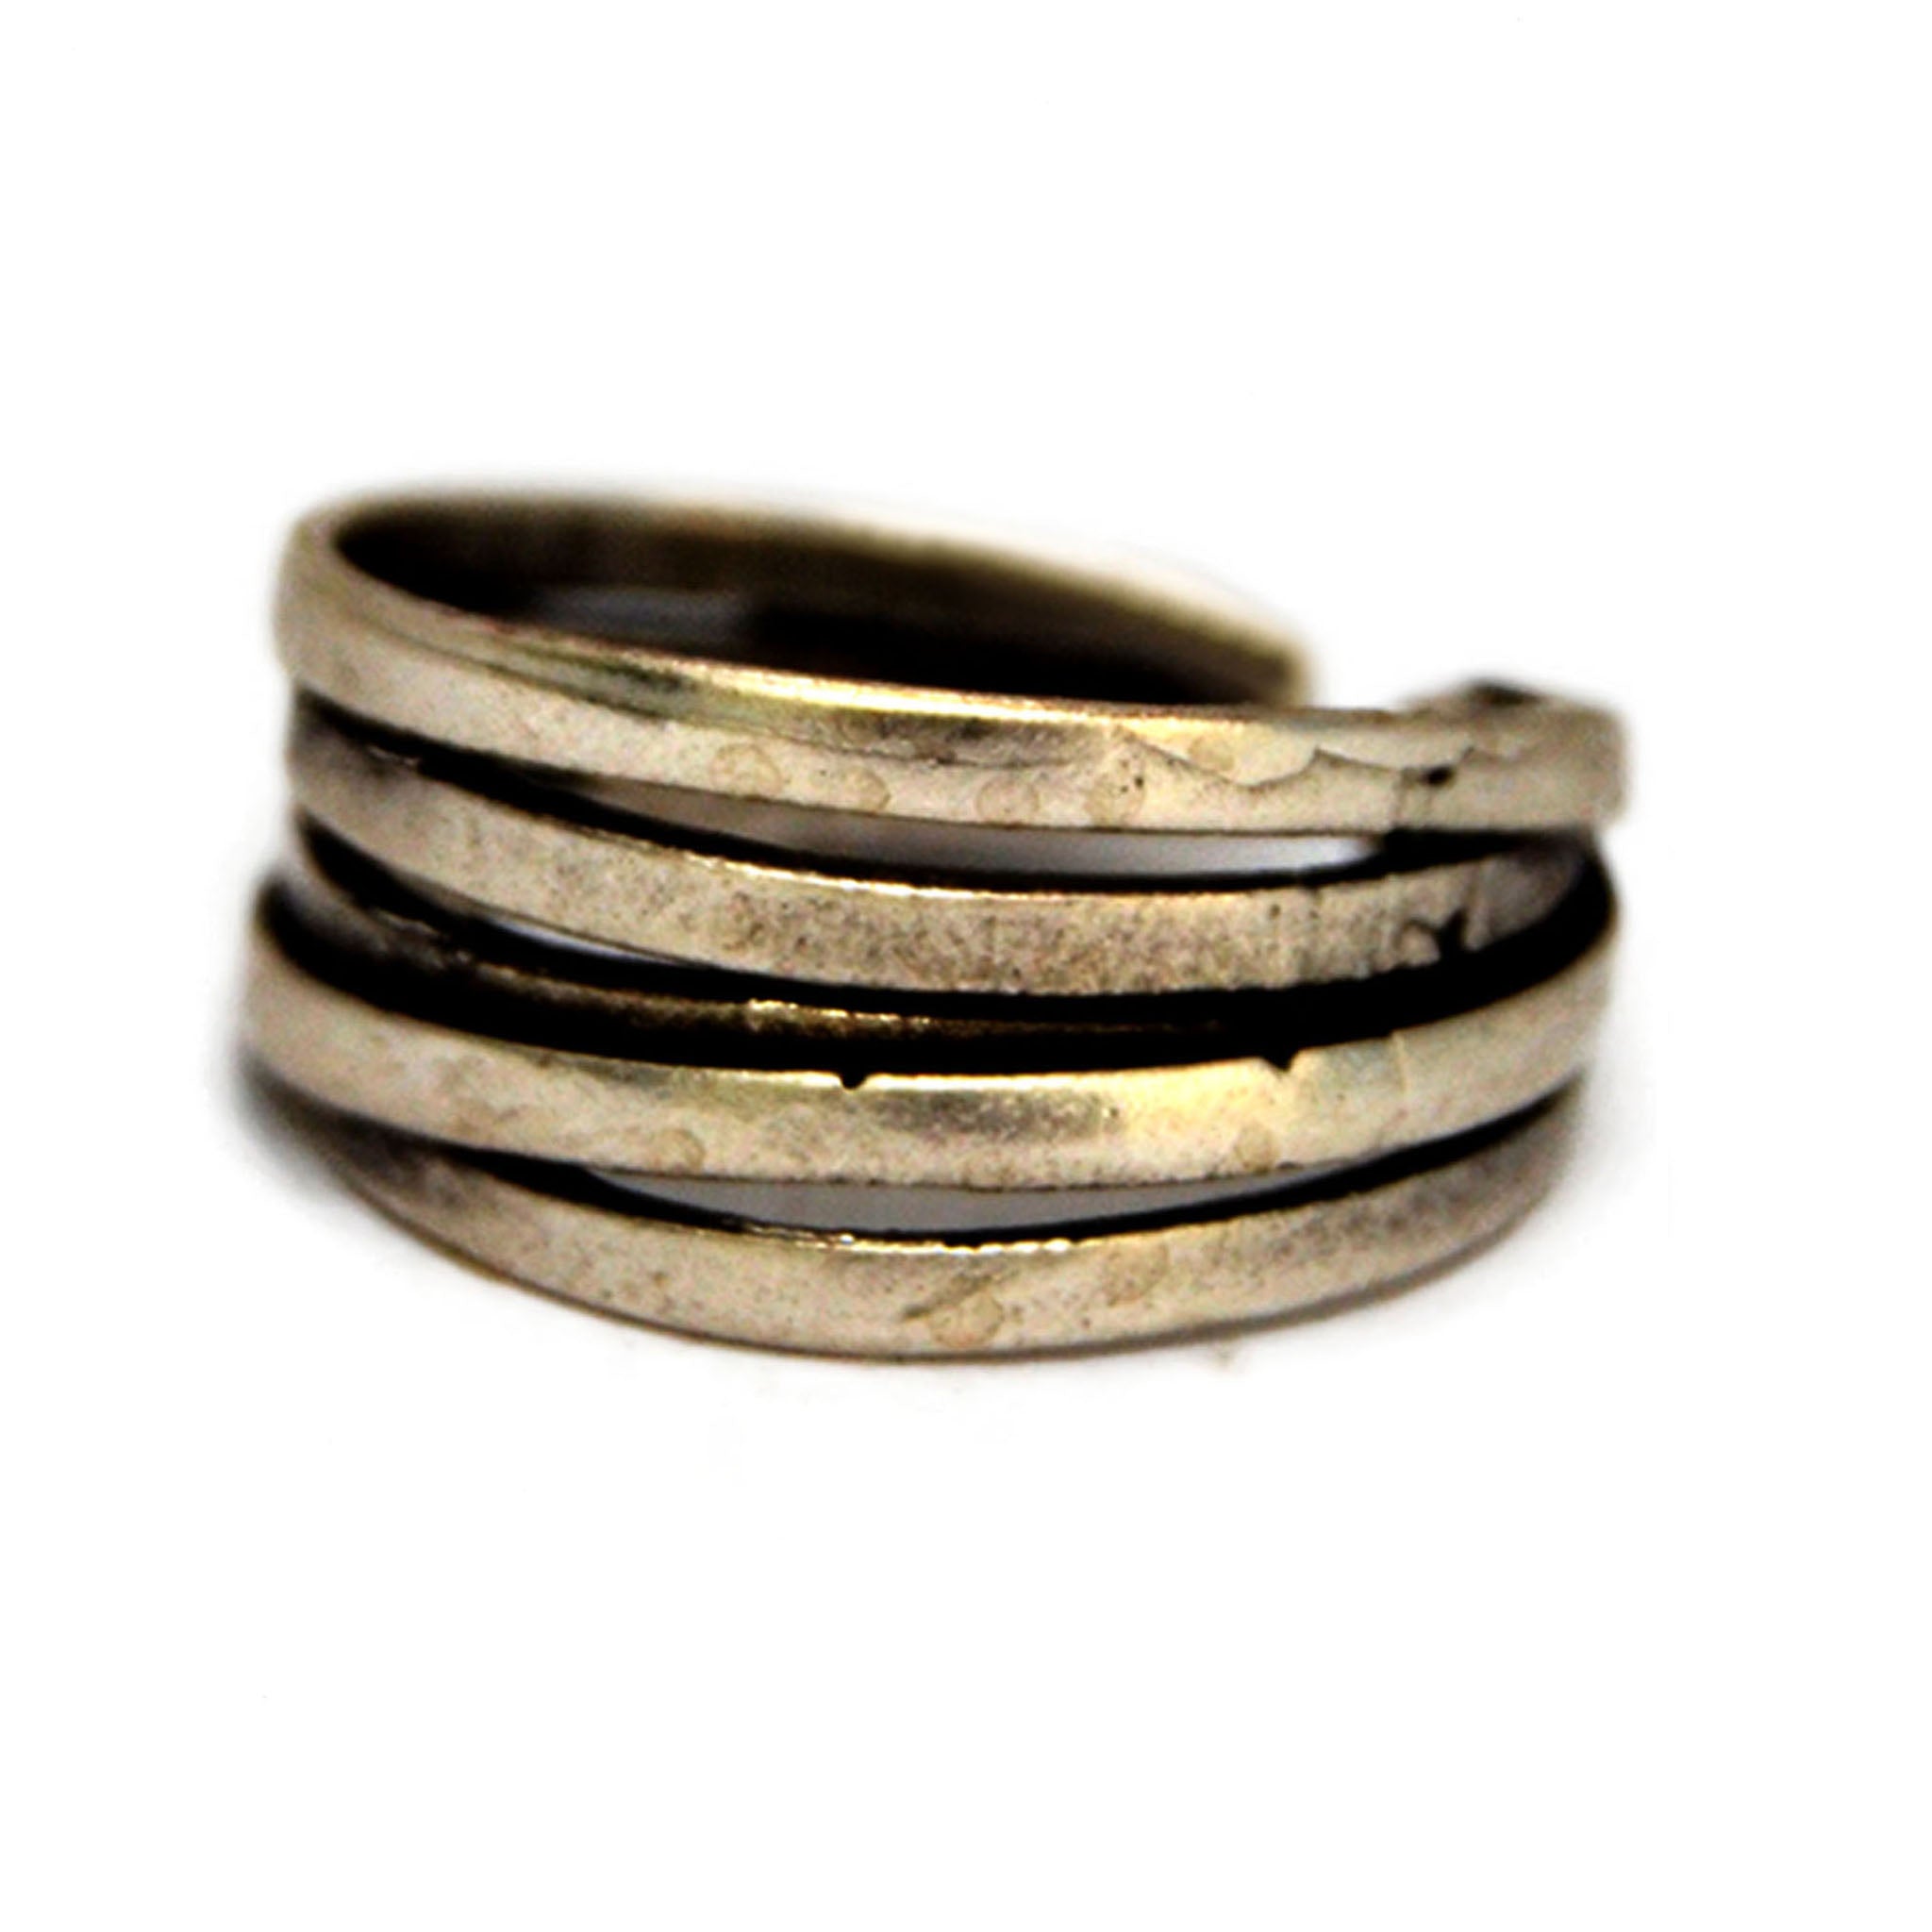 Silver band ring